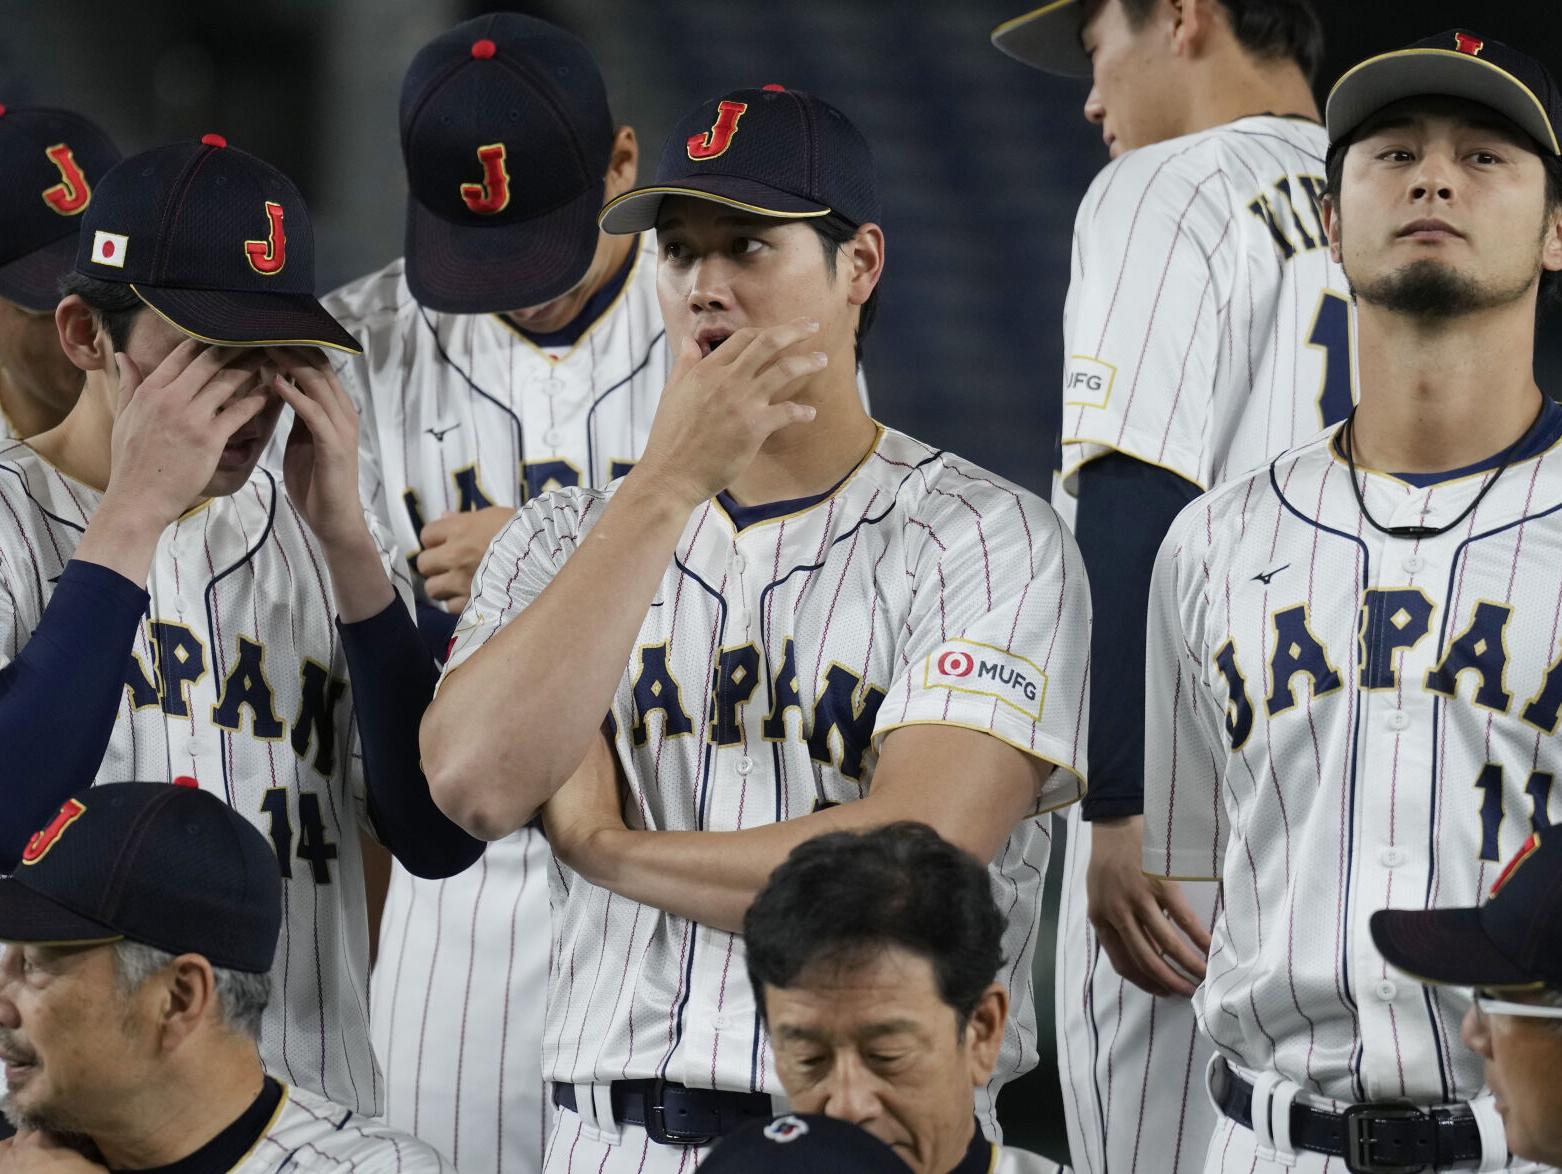 Shohei Ohtani's WBC performance furthers must-see tag